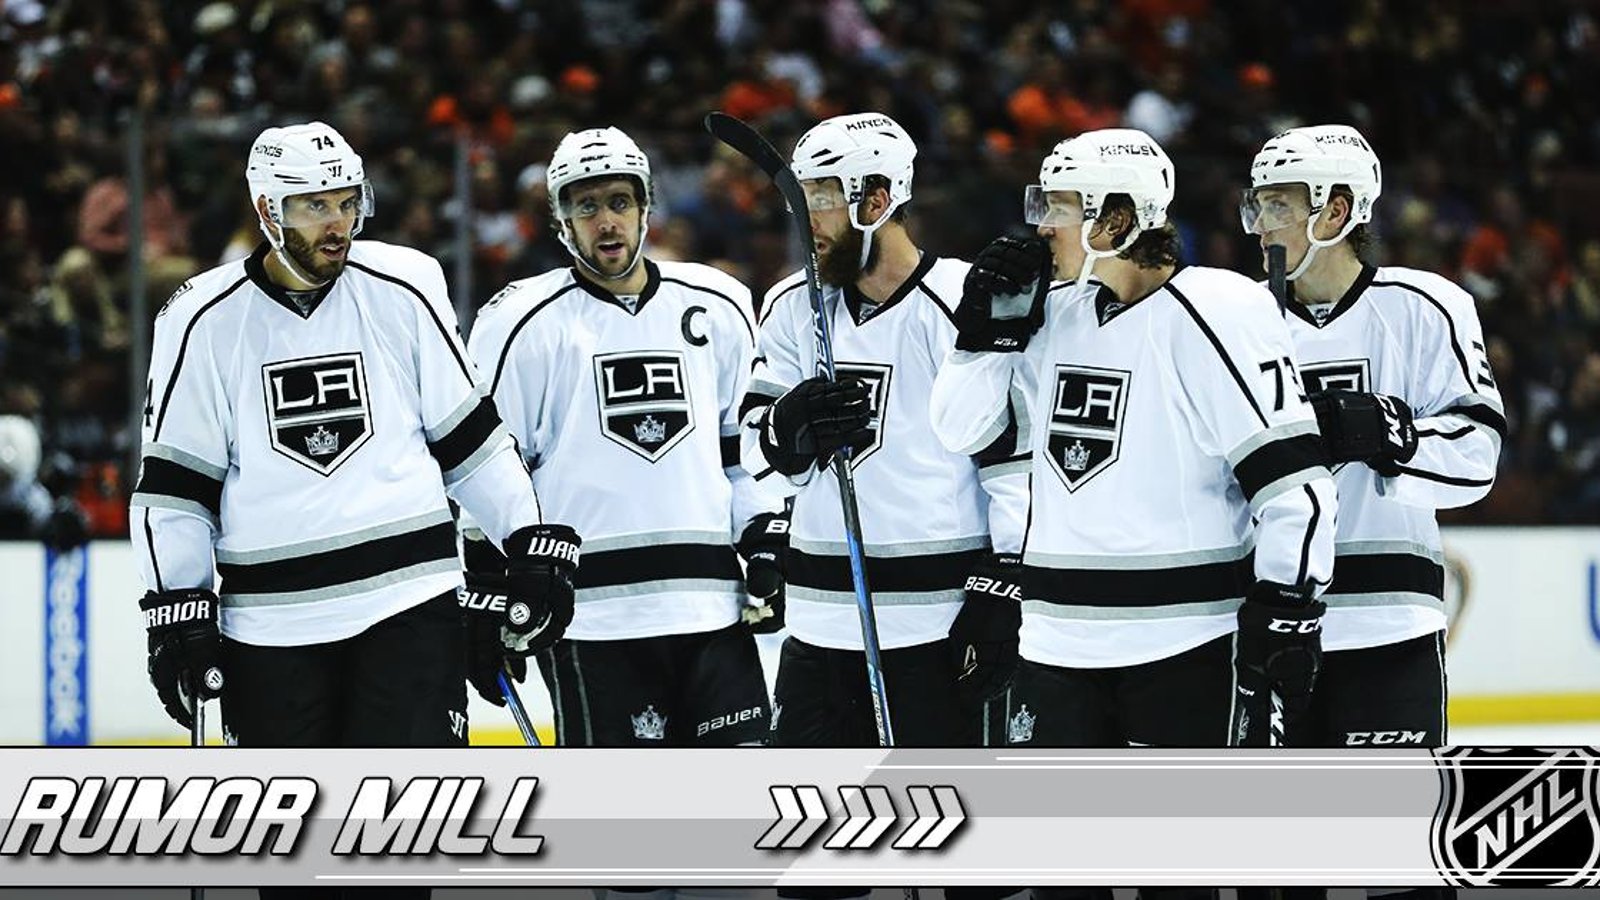 Rumor: L.A. Kings search for a new coach “includes just 1 man.”